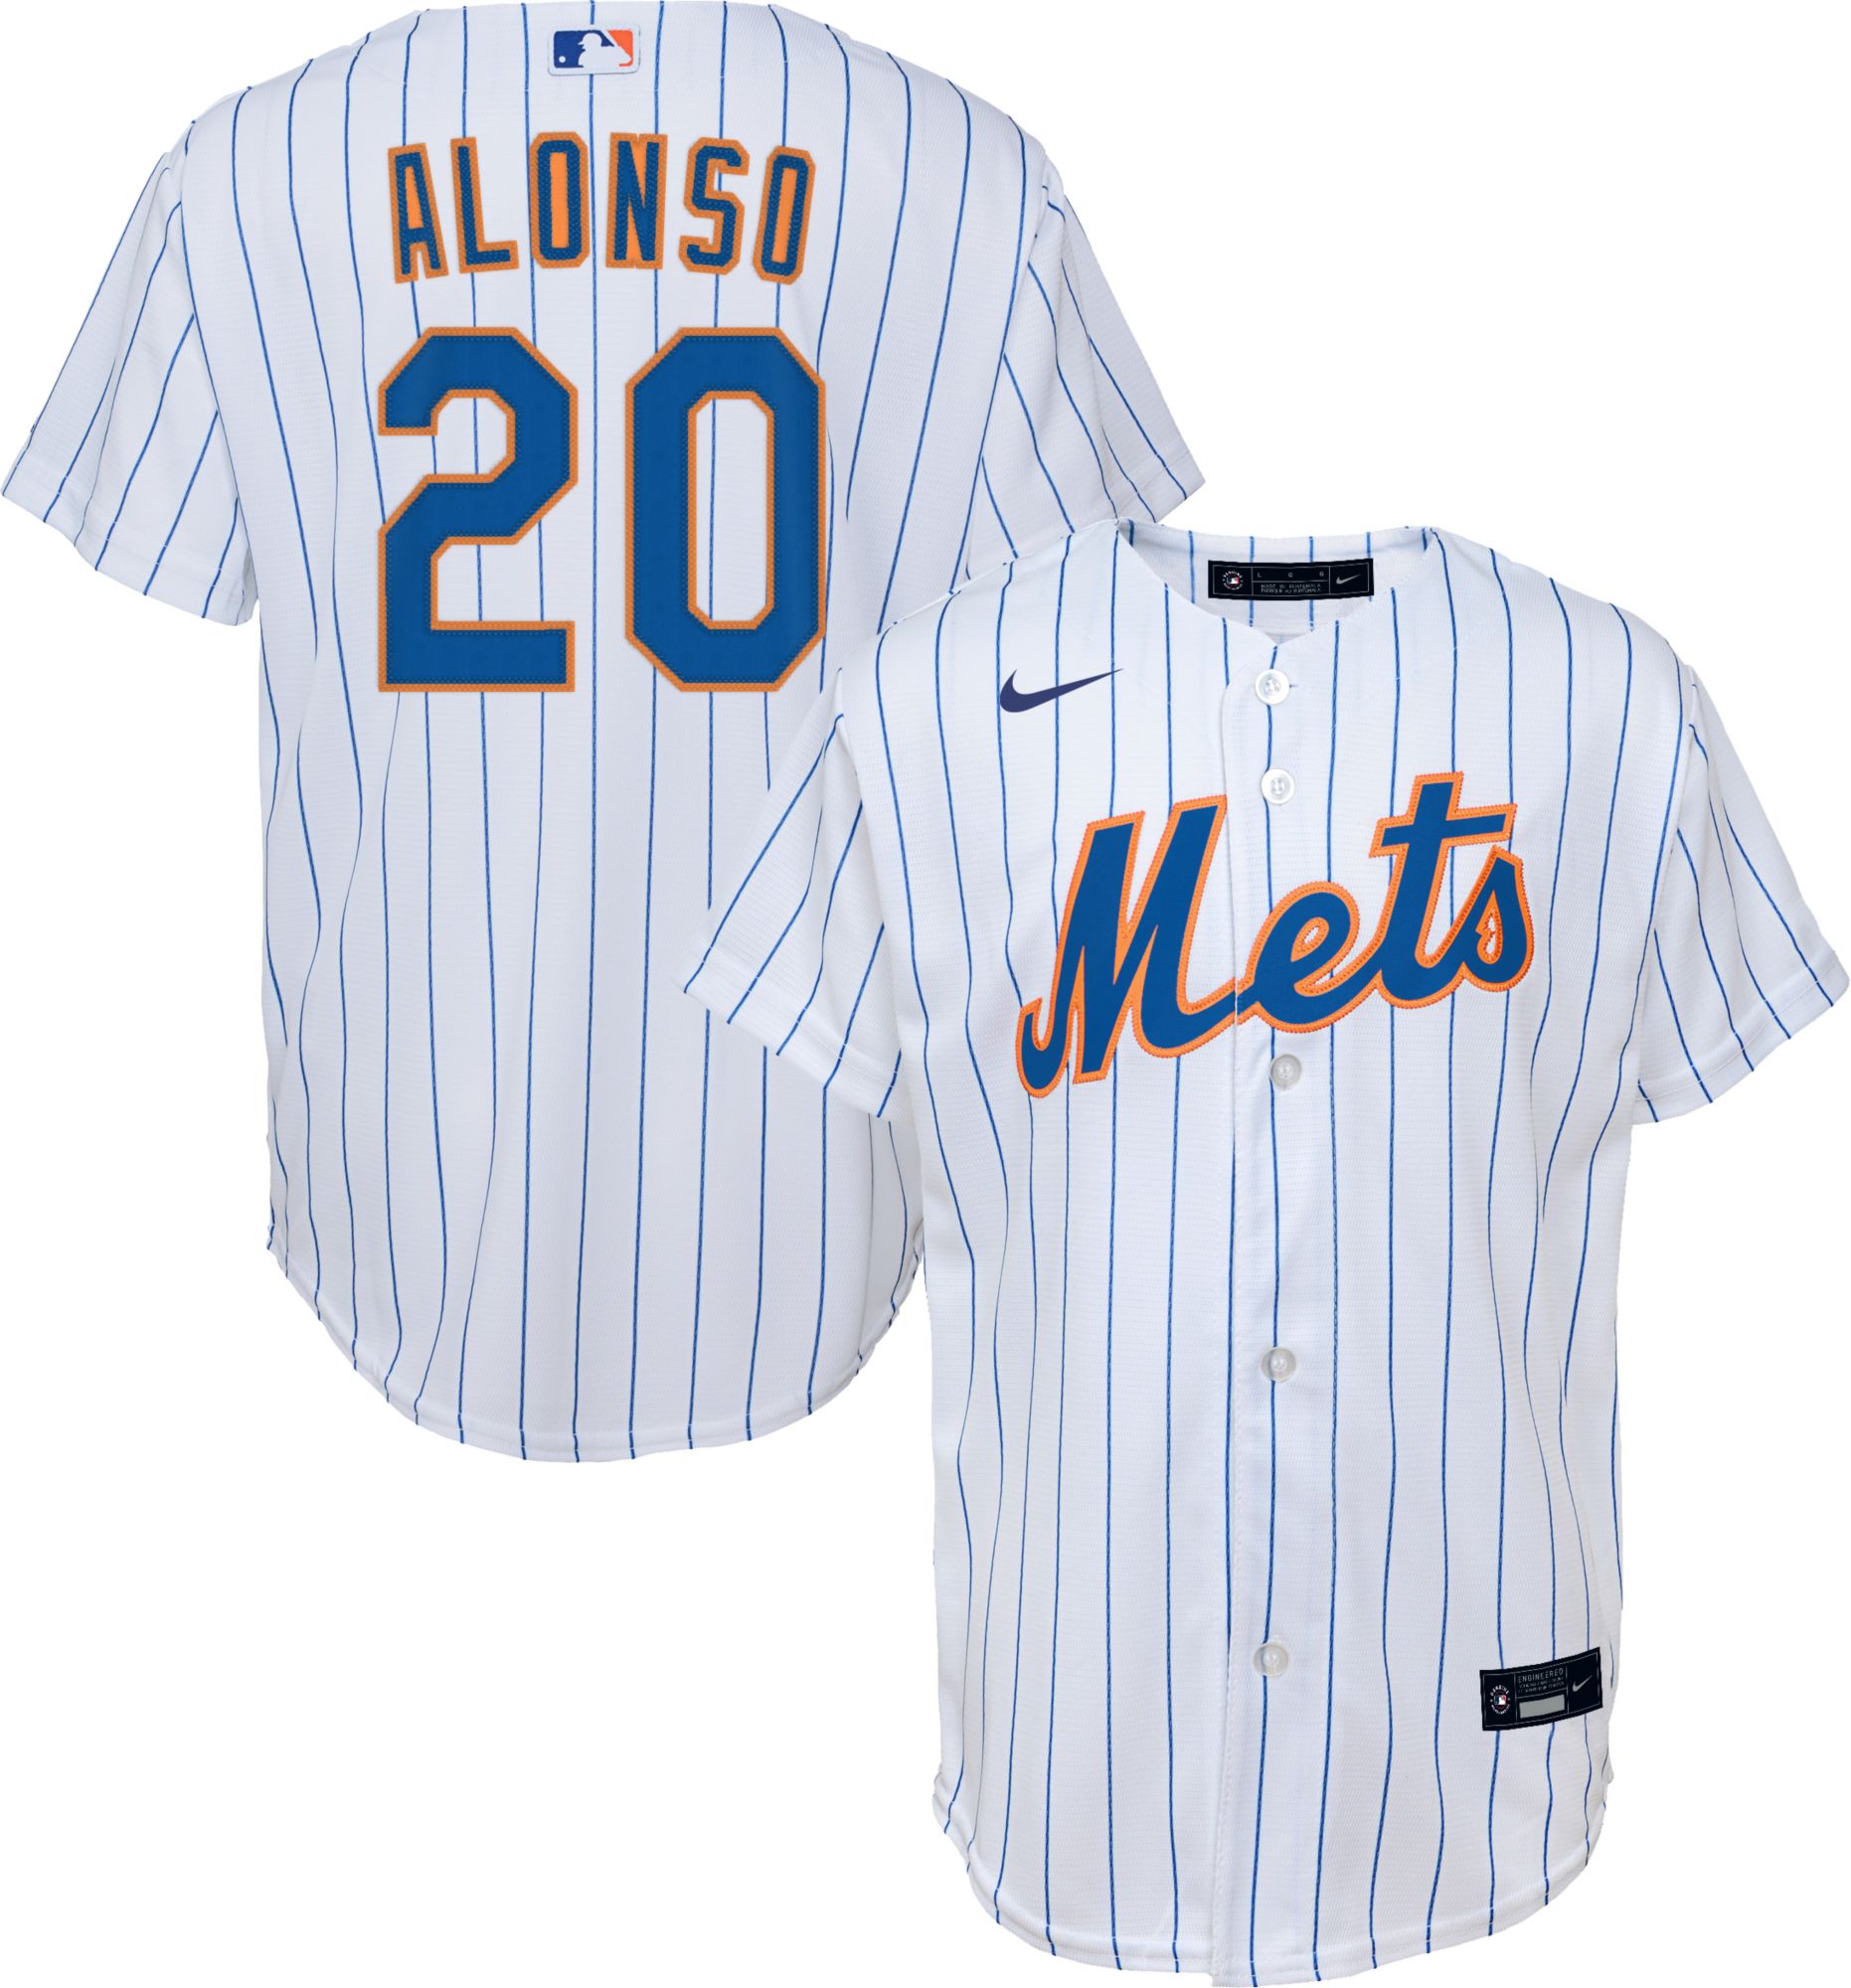 Jacob deGrom Jersey - New York Mets Adult Home Jersey